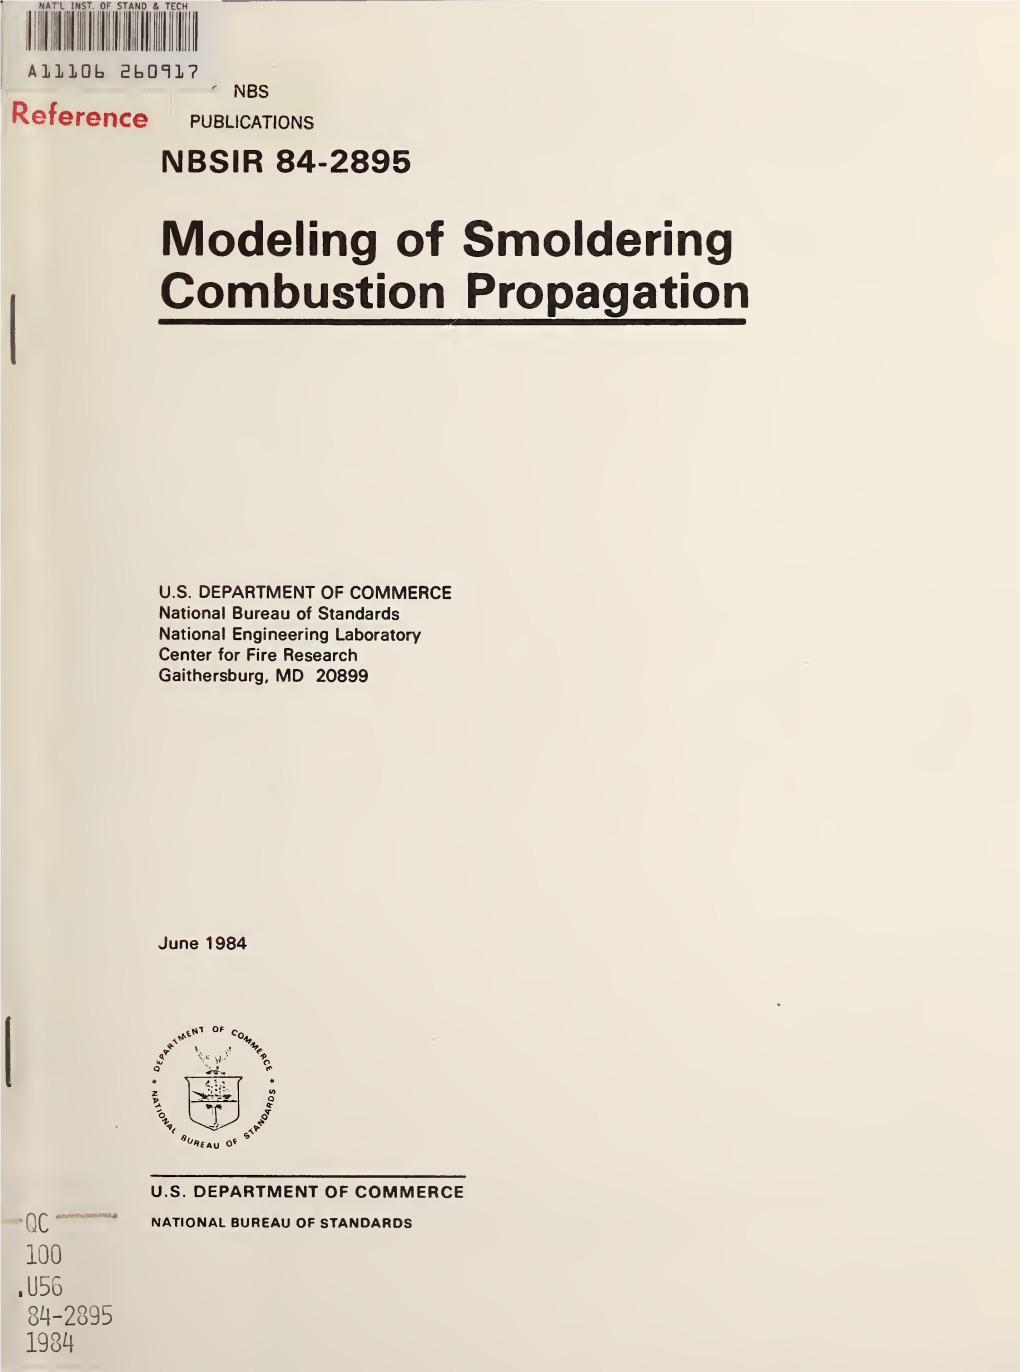 Modeling of Smoldering Combustion Propagation